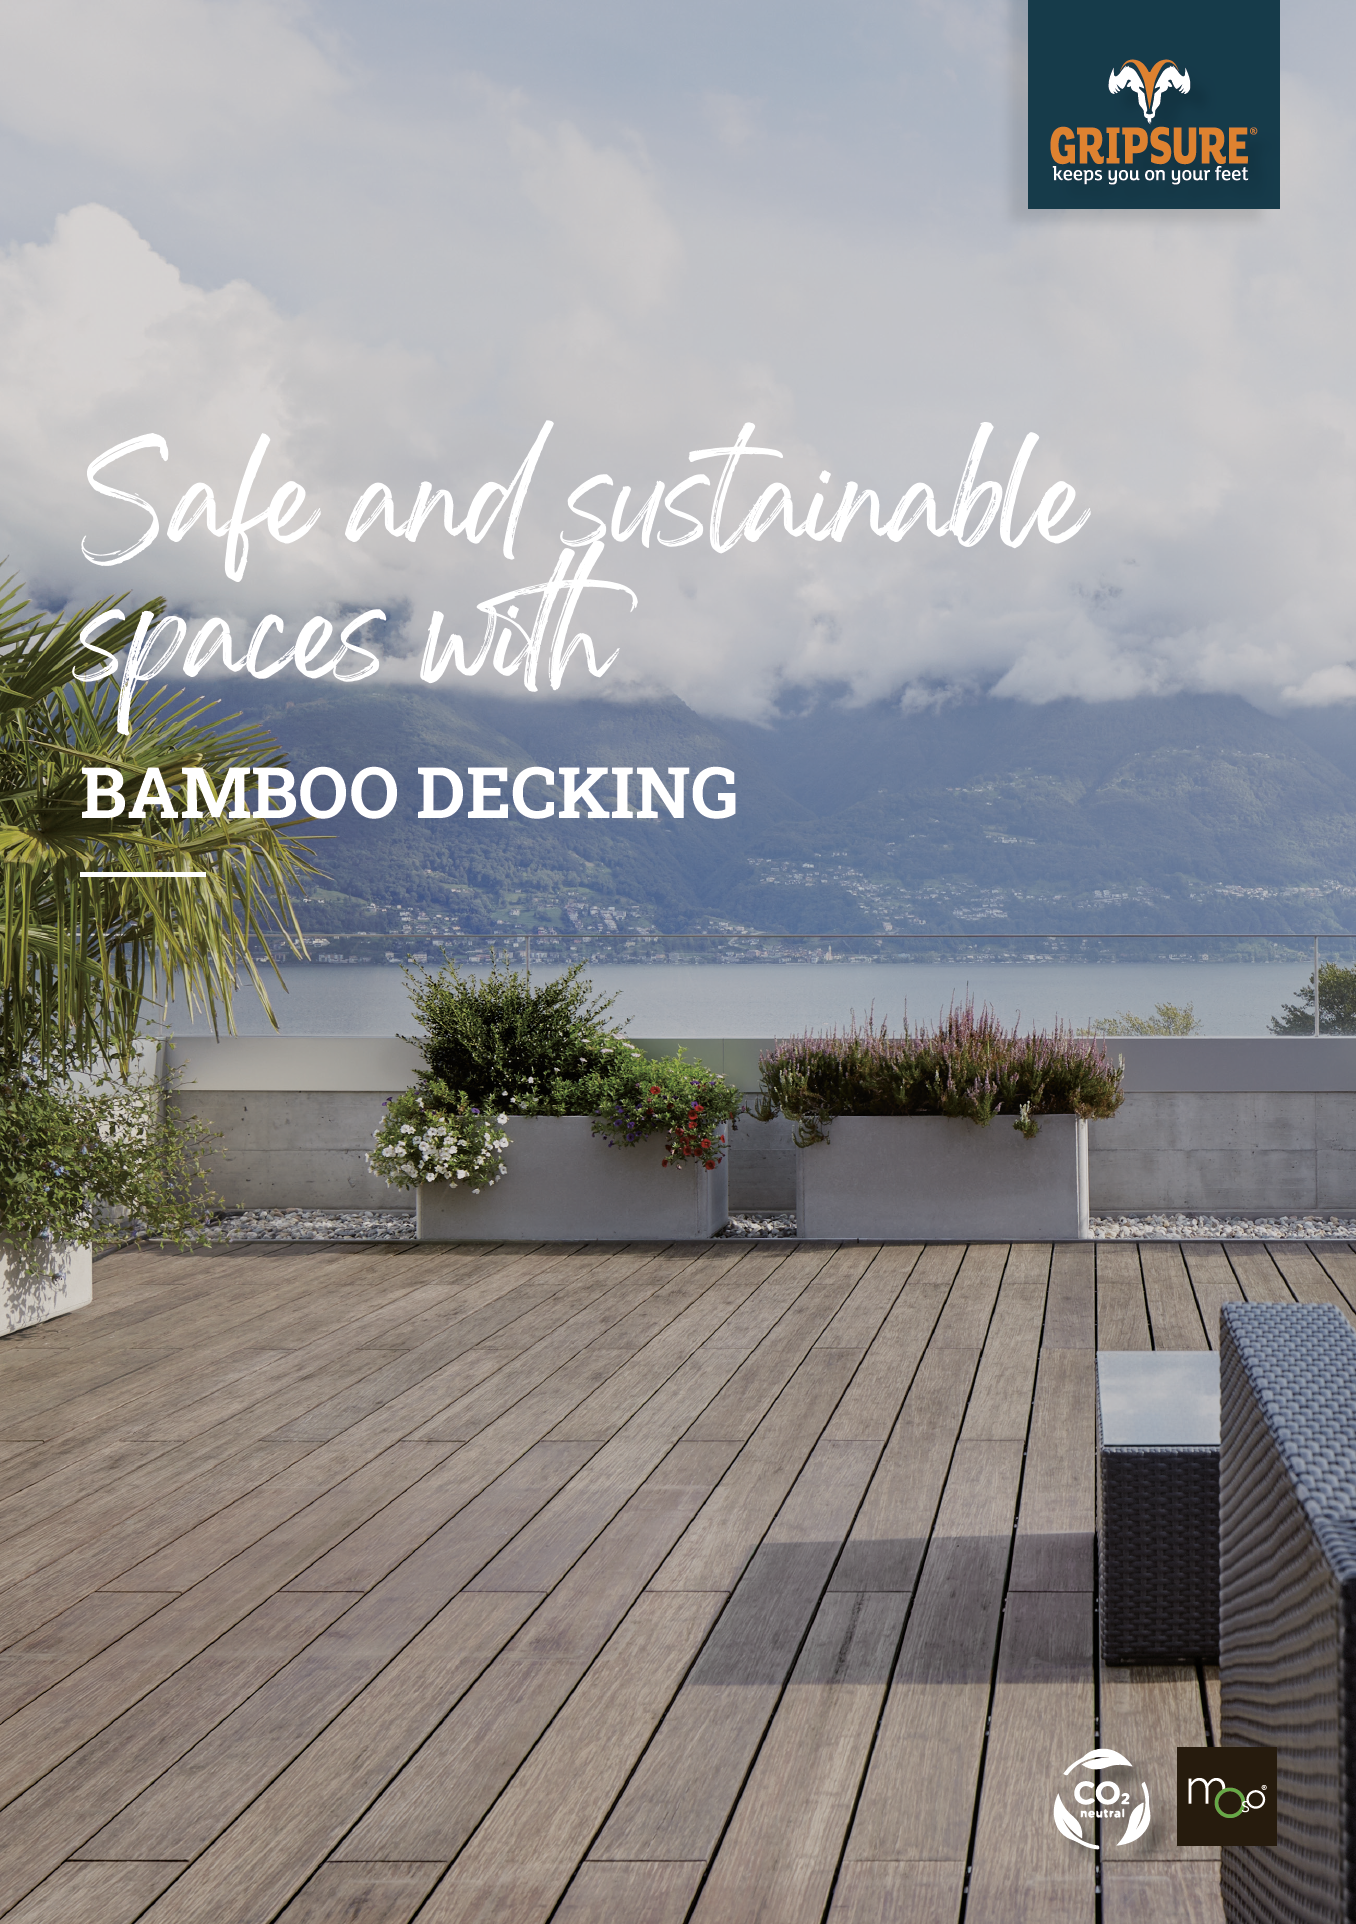 Gripsure MOSO<sup>®</sup> Bamboo Decking Brochure